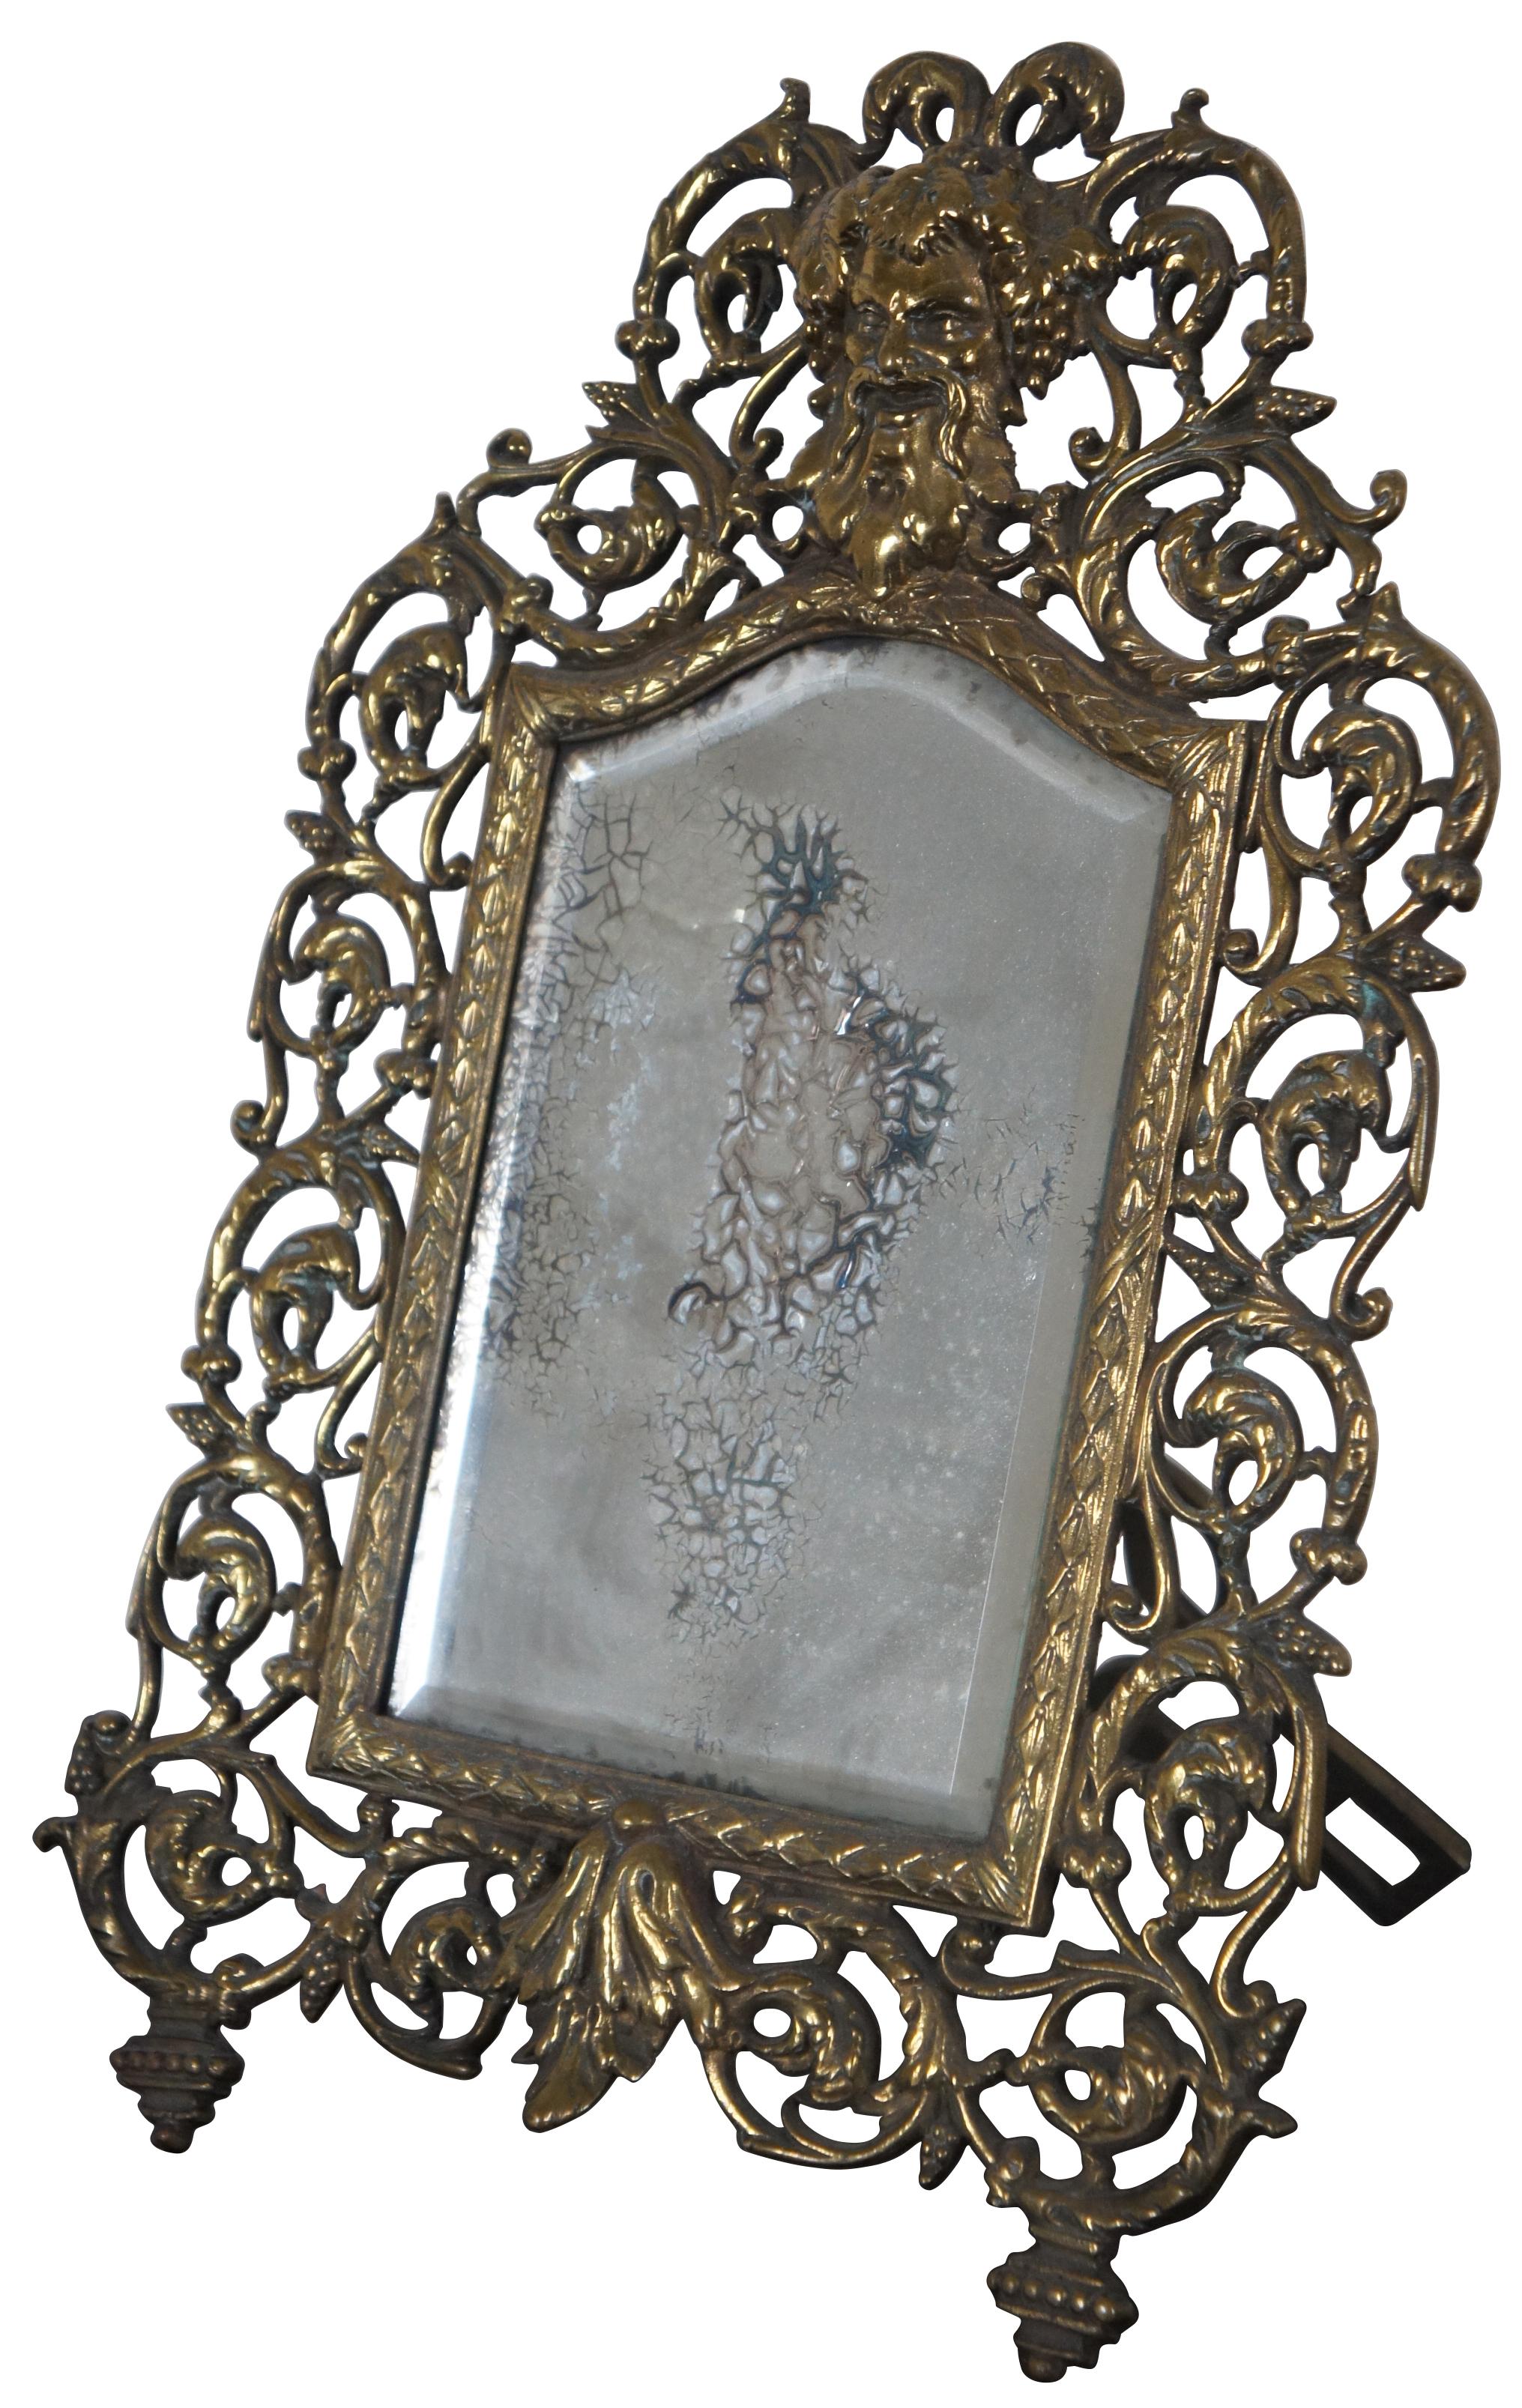 Antique gilded cast iron easel style tabletop mirror with an ornate frame of swirling leaves around the face of Bacchus or Dionysus. 

Measures: 10” x 8.5” x 14.125” / Mirror - 5” x 7.75” (width x depth x height).